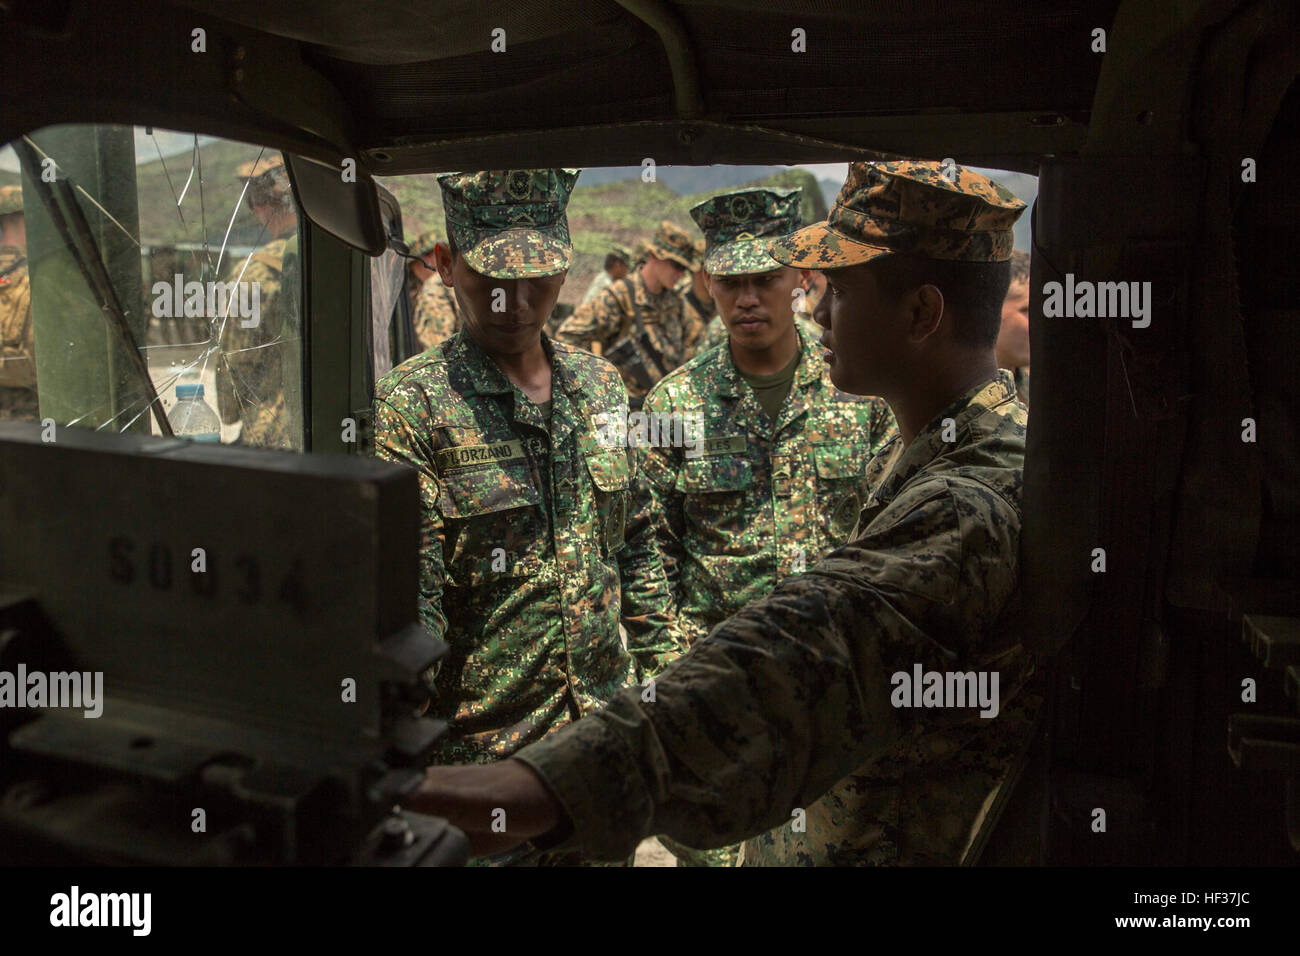 U.S. Marine Sgt. Darren Madrid, right, displays the interior of a Humvee to Philippine Marine Corps Pvts. Ariel Lorzano, left, and Almer Cuales, during a subject matter expert exchange class April 20 at Crow Valley, Philippines, in part of Exercise Balikatan 2015. The U.S. Marines and Filipino Marines were able to learn each other’s standard operating procedures for corrective maintenance on logistical vehicles. Exercise Balikatan is a bilateral training exercise between the Armed Forces of the Philippines and U.S. military to increase Madrid is a motor transportation operator currently assign Stock Photo